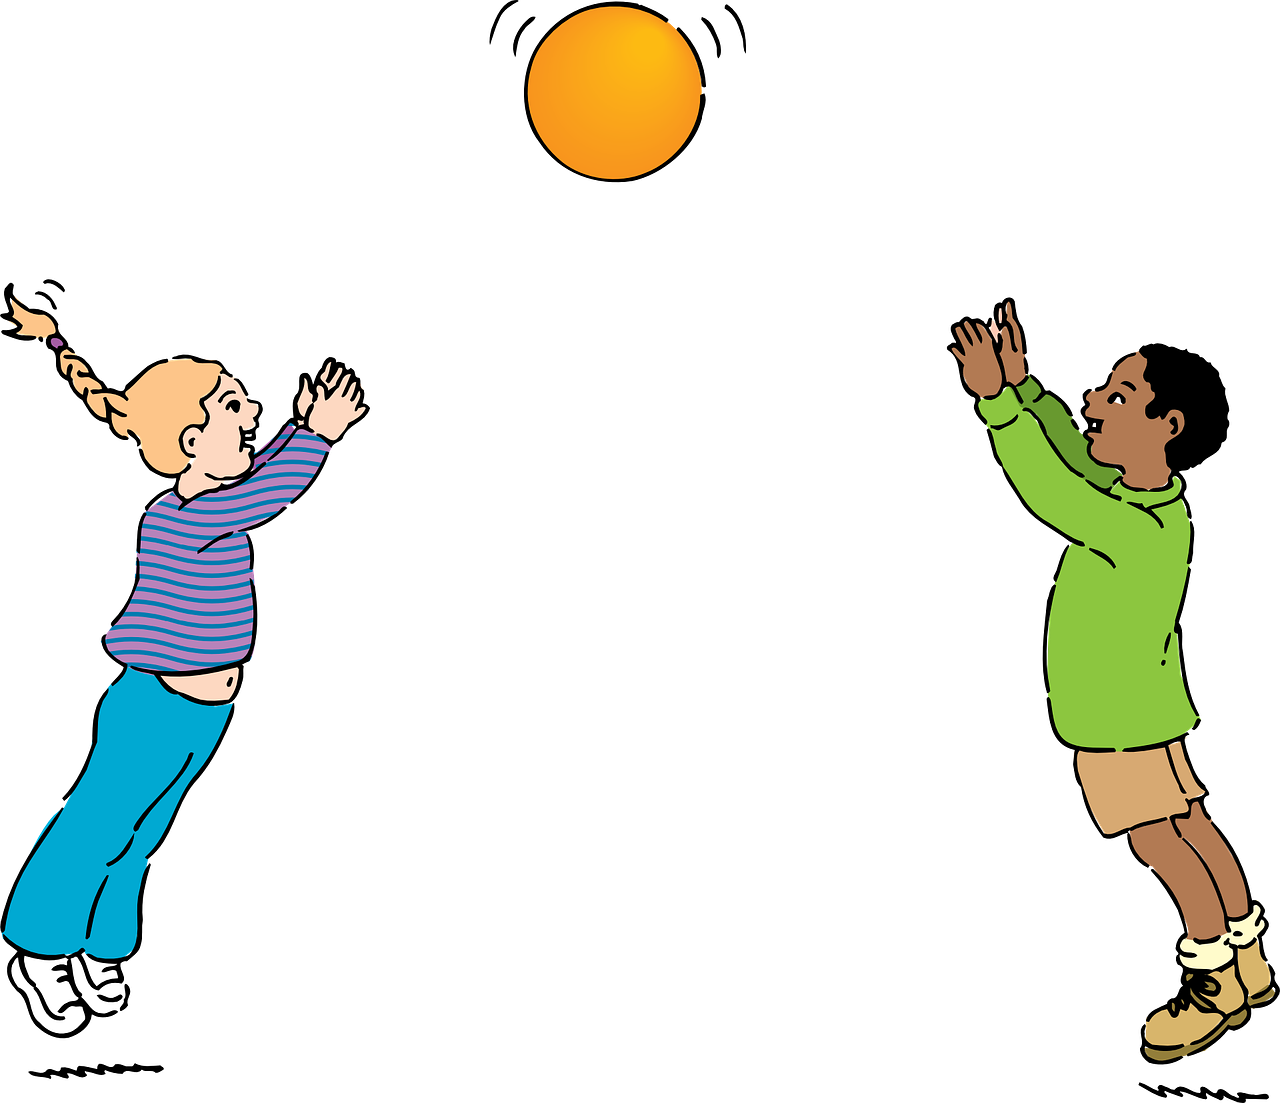 A girl and a boy are on either side with their hands up in the air ready to catch a yellow ball that is in the air in between them.